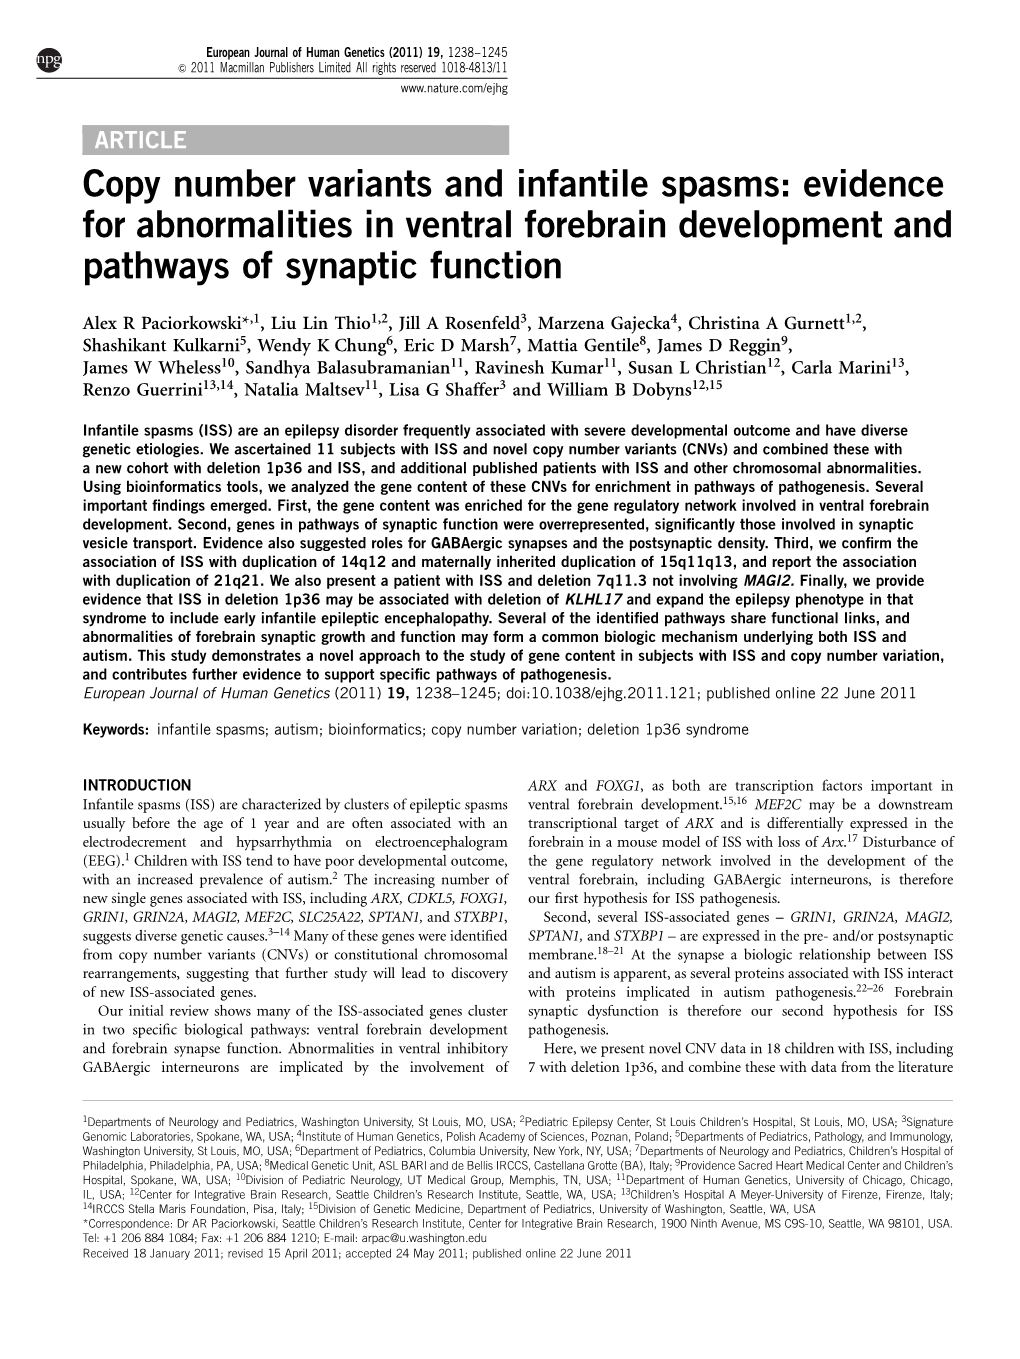 Copy Number Variants and Infantile Spasms: Evidence for Abnormalities in Ventral Forebrain Development and Pathways of Synaptic Function